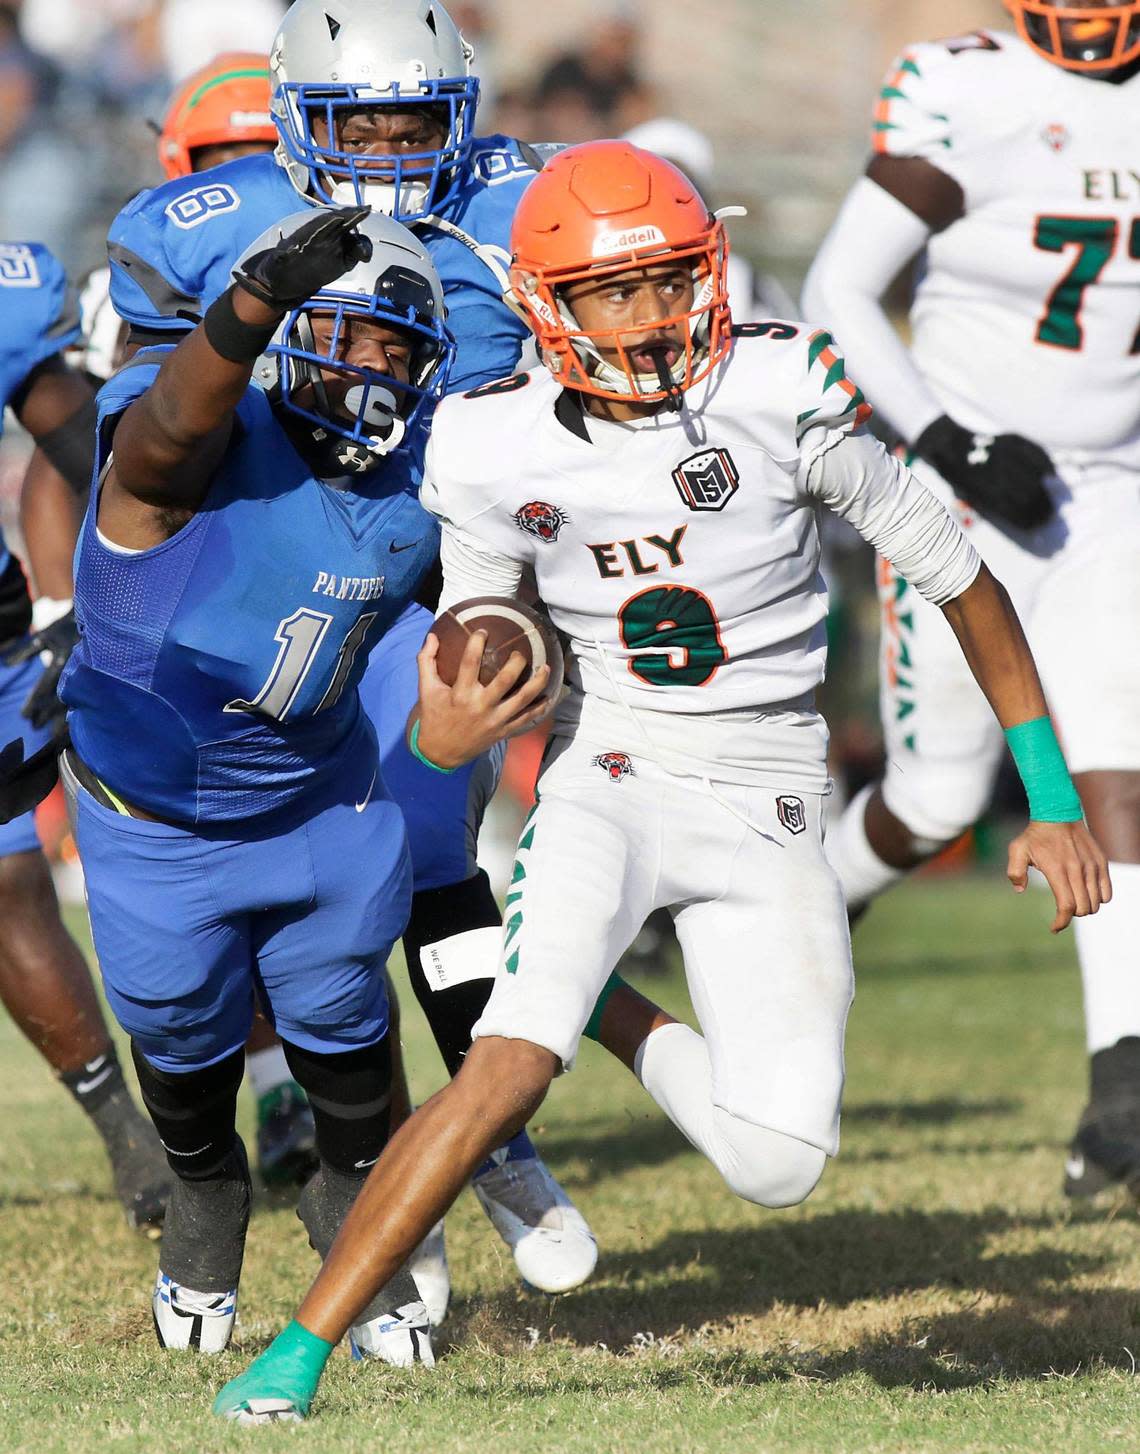 Blanche Ely Tigers quarterback Nahcoy Daniels (9) carries the ball against Dillard Panthers during football game on Saturday, November 5, 2022 at Dillard HS in Fort Lauderdale. Andrew Uloza / for Miami Herald